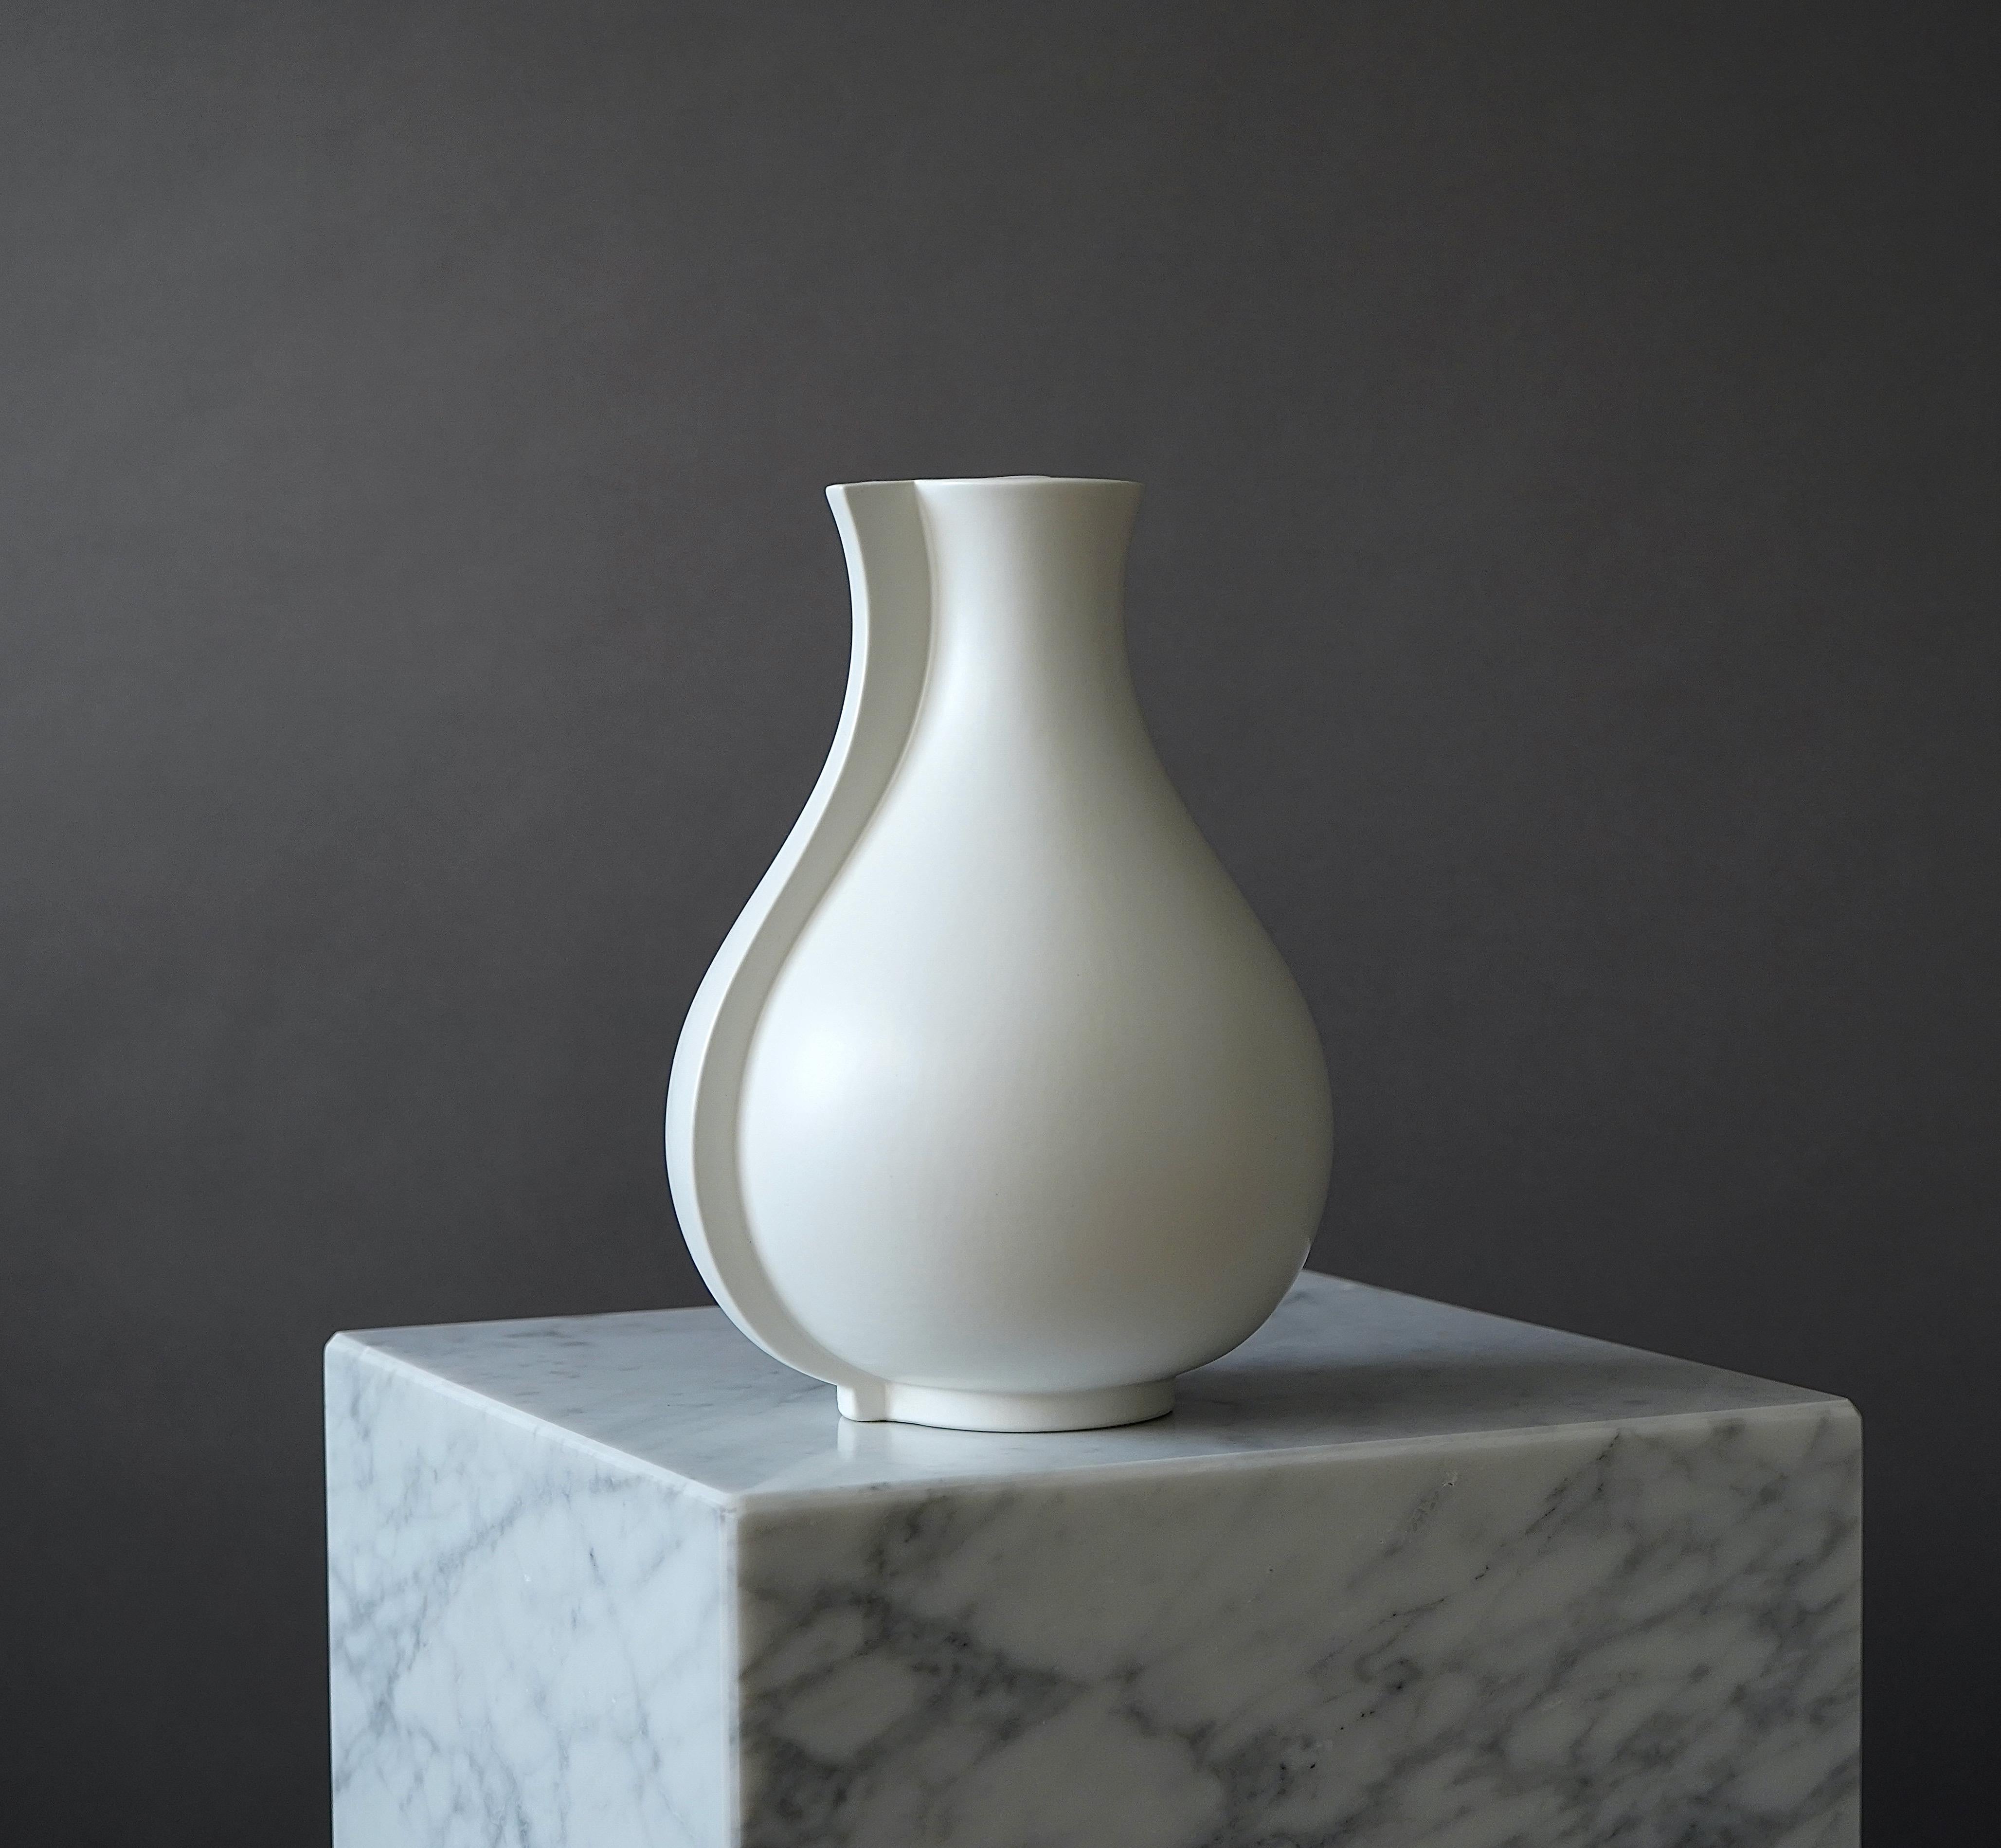 A beautiful 'Surrea' stoneware vase with 'Carrara' glaze. 
Made by Wilhelm Kåge at Gustavsberg in Sweden, 1950s. 

Excellent condition. 
Stamped 'Gustavsberg / SURREA'.

Wilhelm Kåge was a Swedish artist, painter, and ceramicist. Between 1917 and